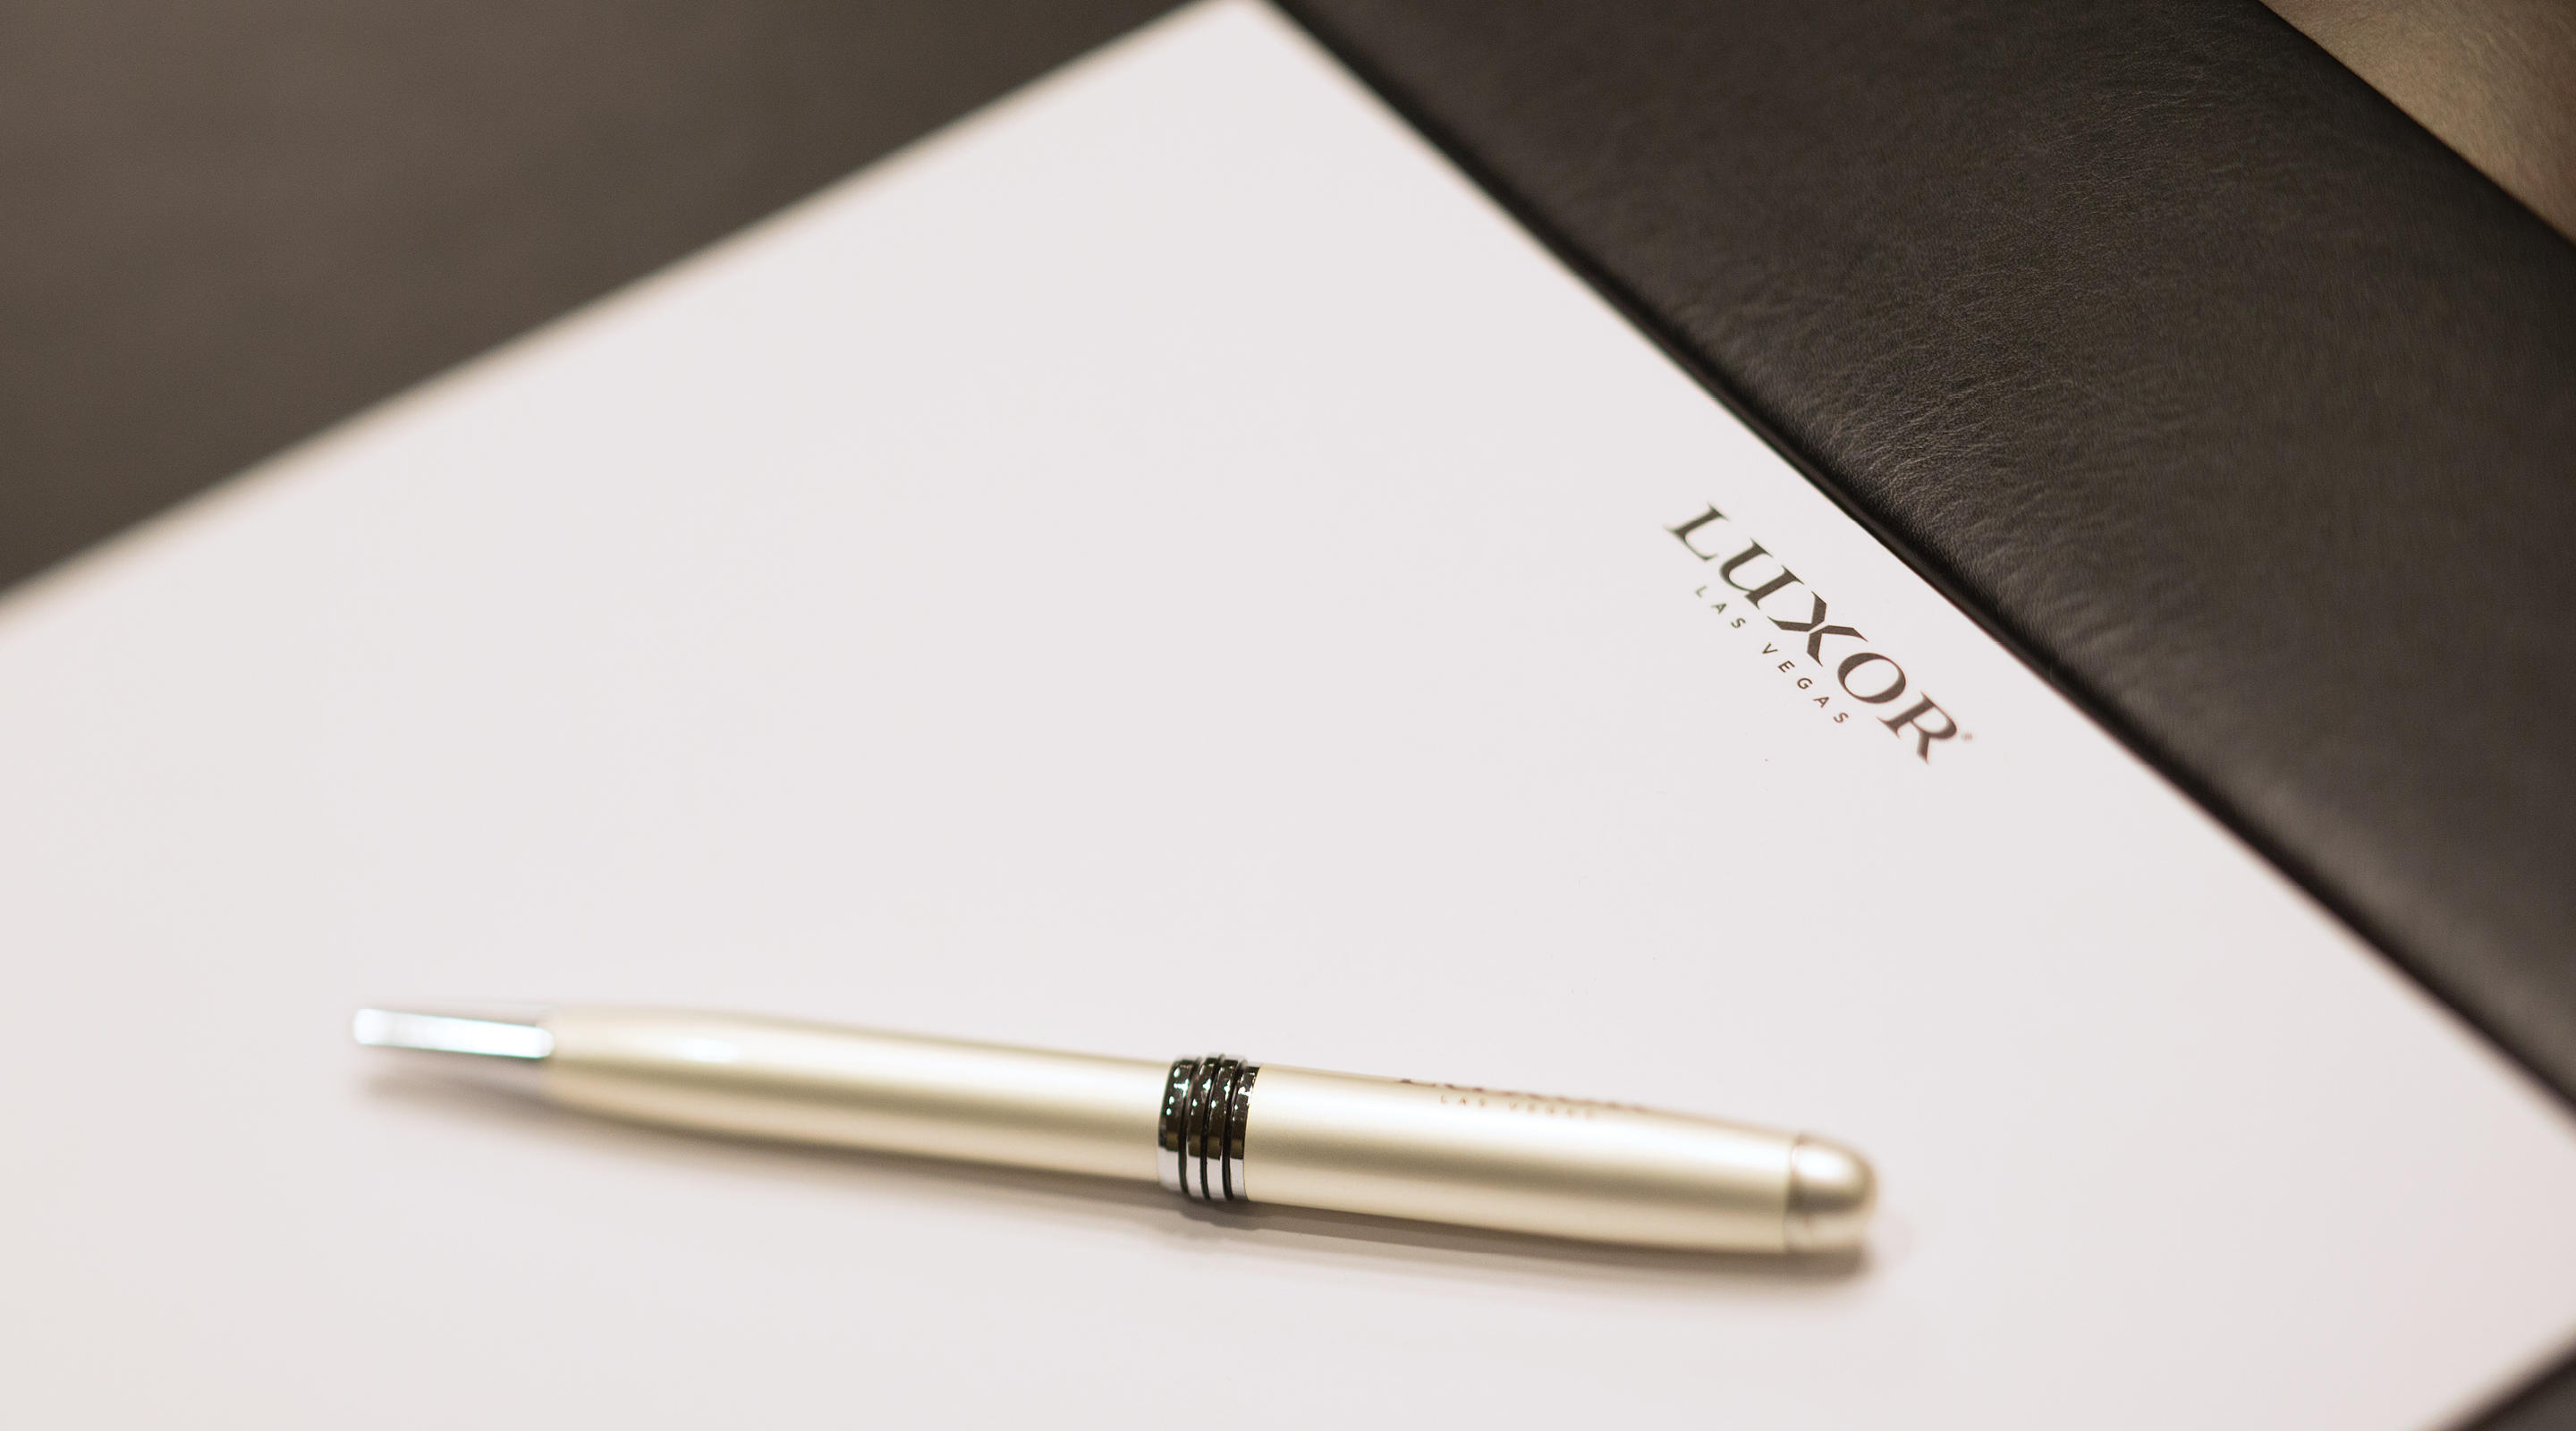 luxor-meetings-conventions-stationary